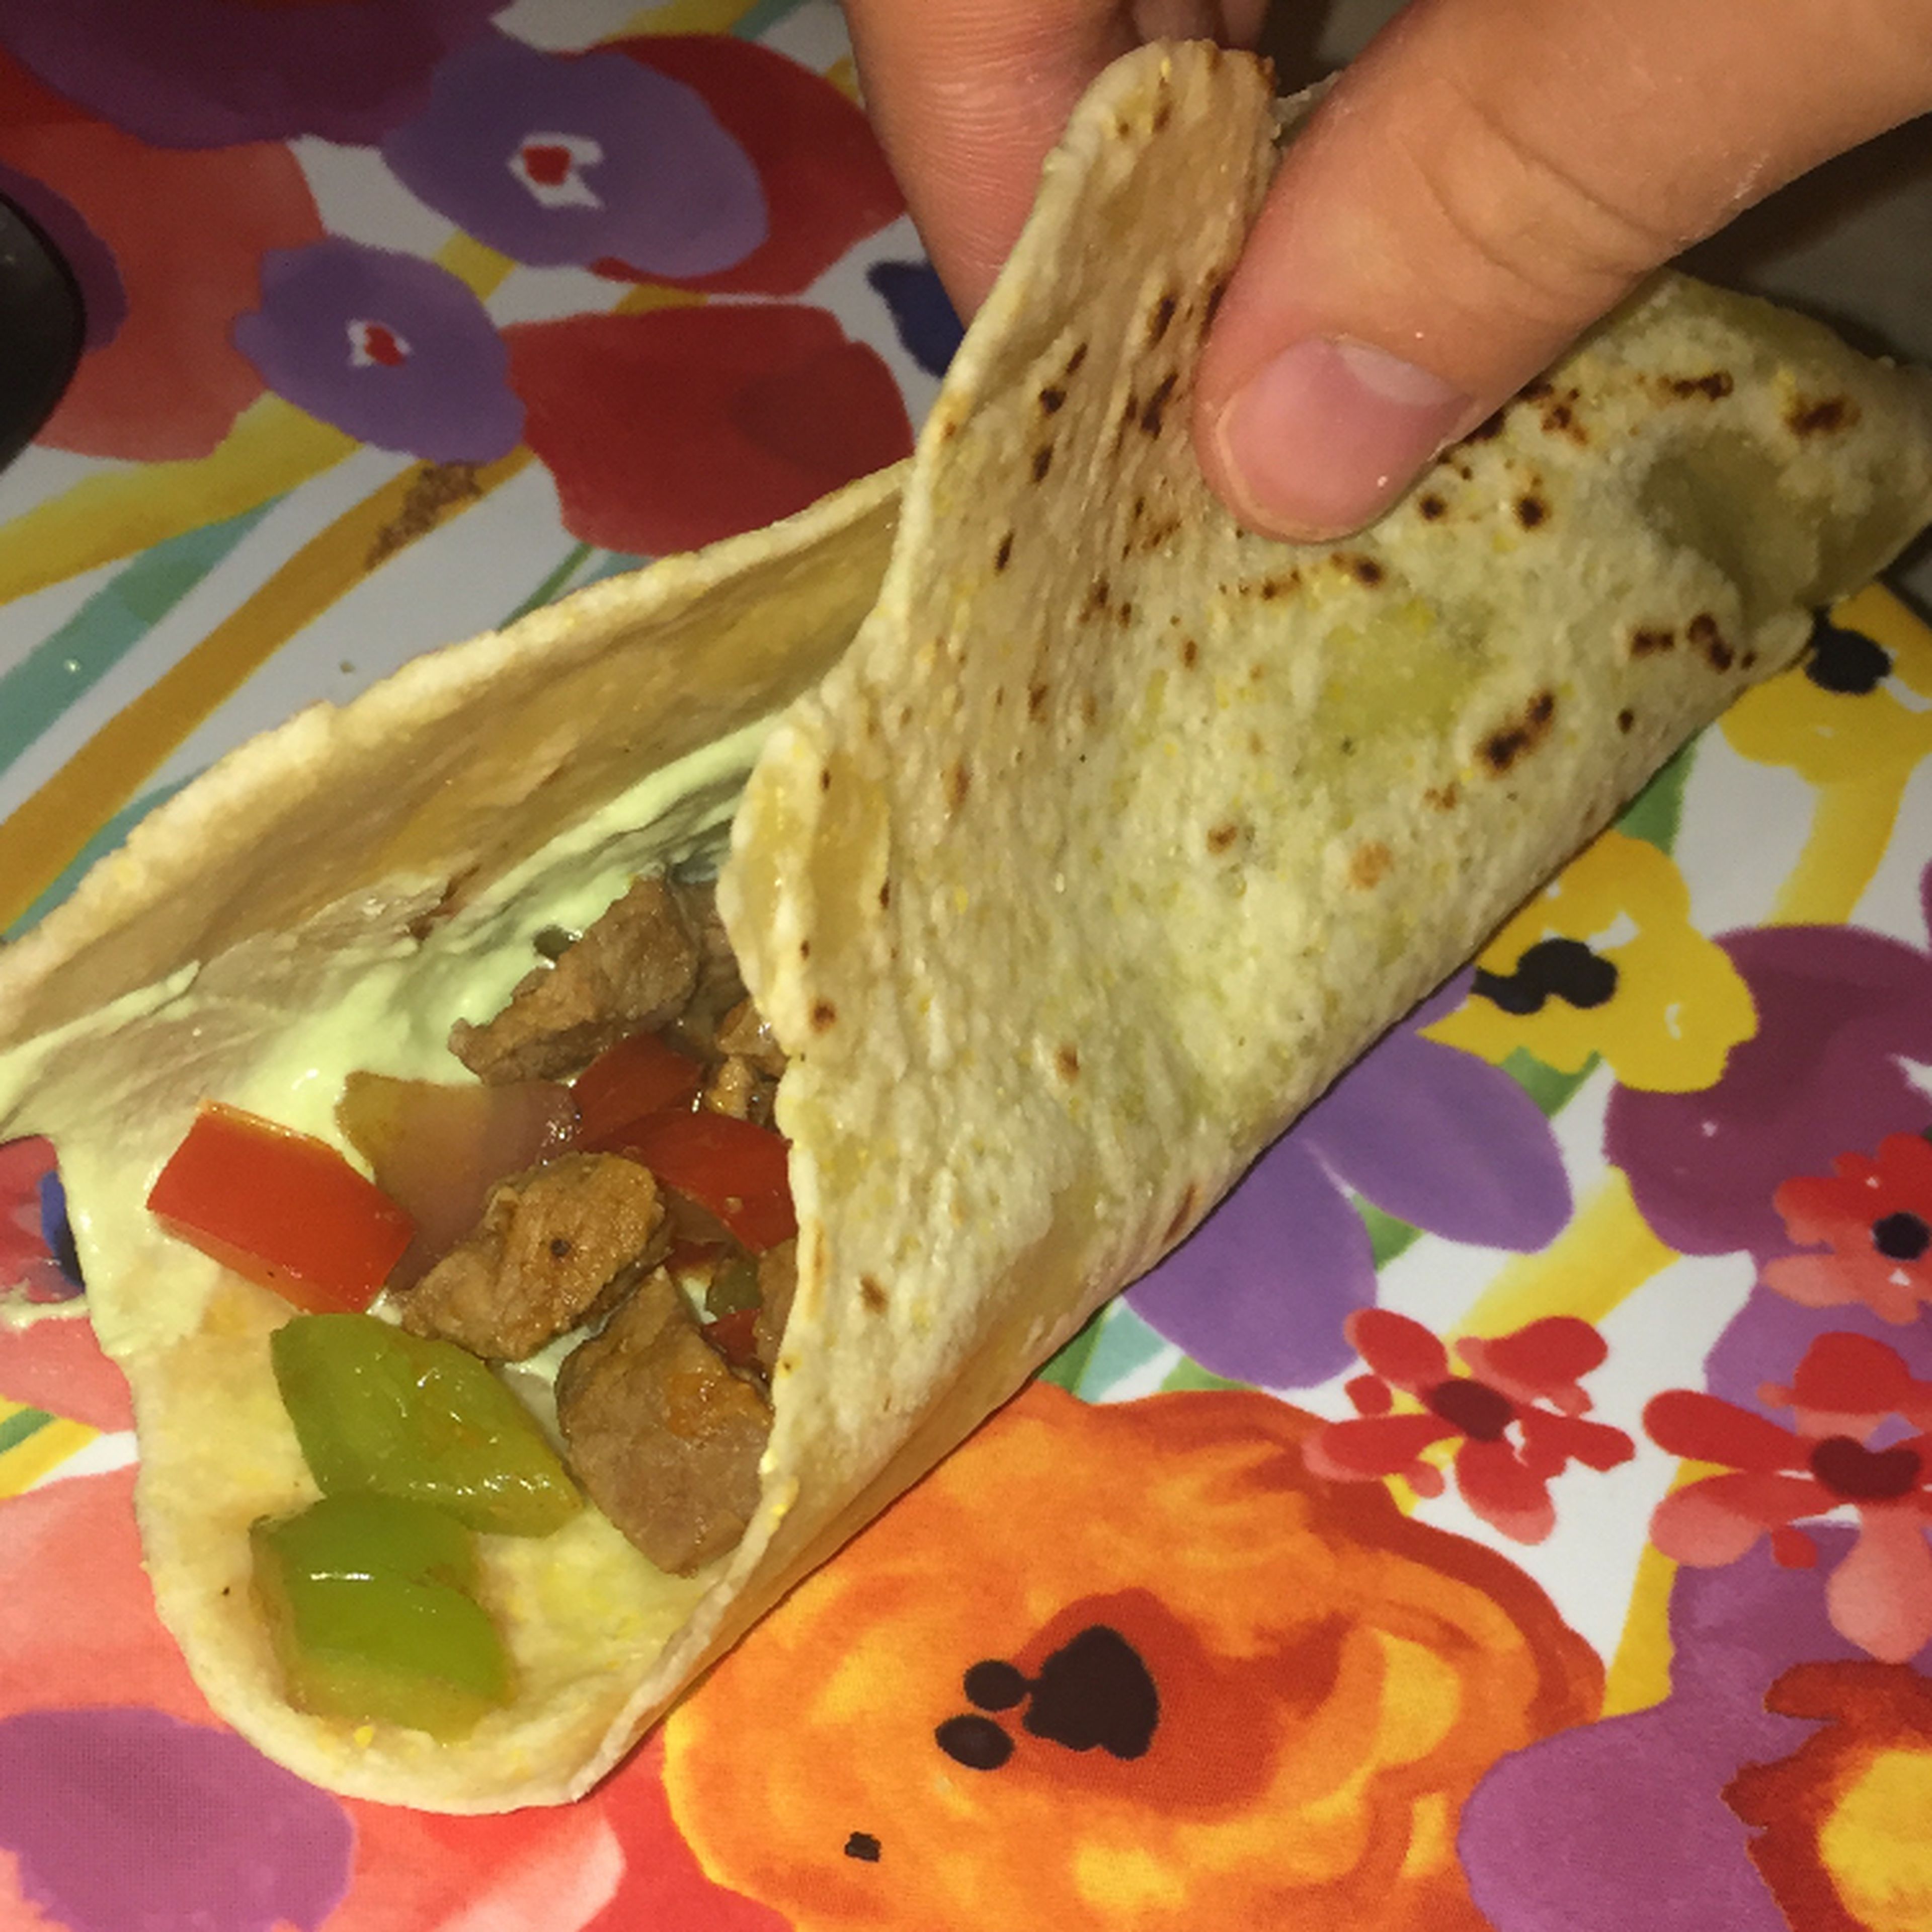 enjoy with your favourite filling! (these are steak tacos, but you can make burritos, quesadillas, or even tortilla chips!). I know this picture is pretty ugly, but tacos are never ugly, right?